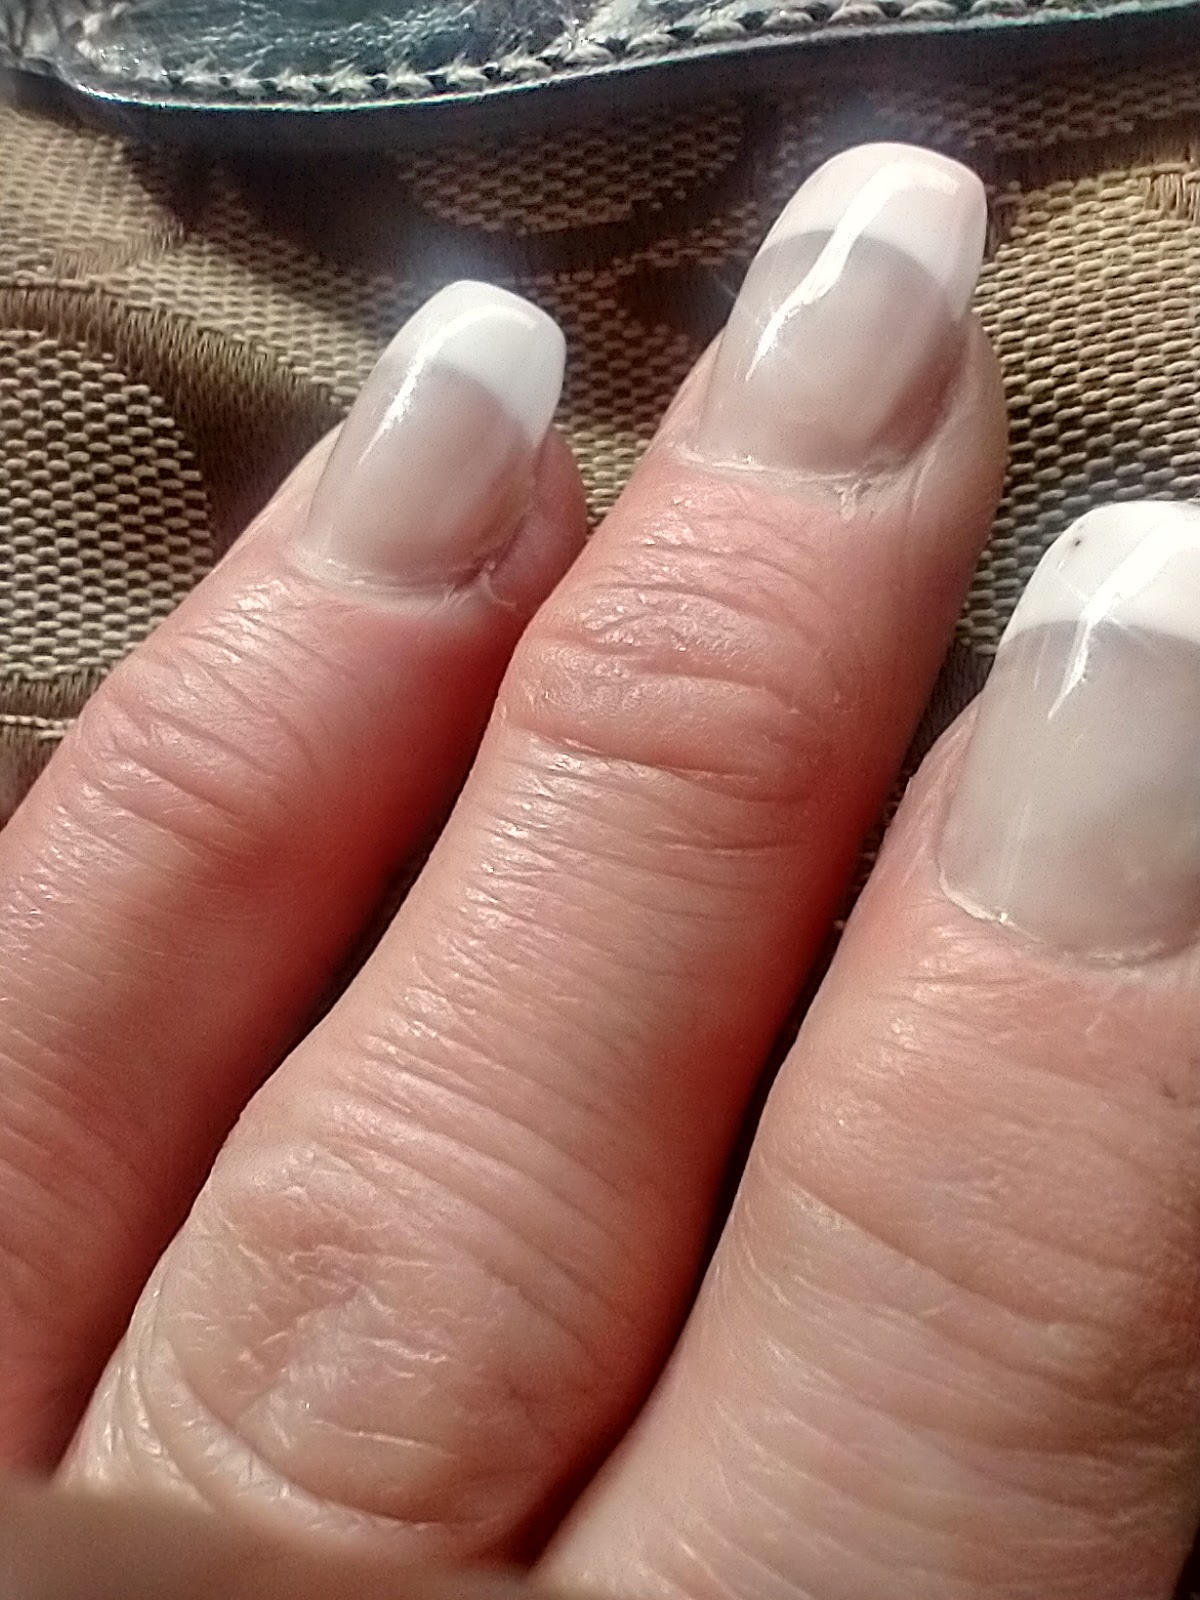 Rose's Nails Union City Tennessee 38261